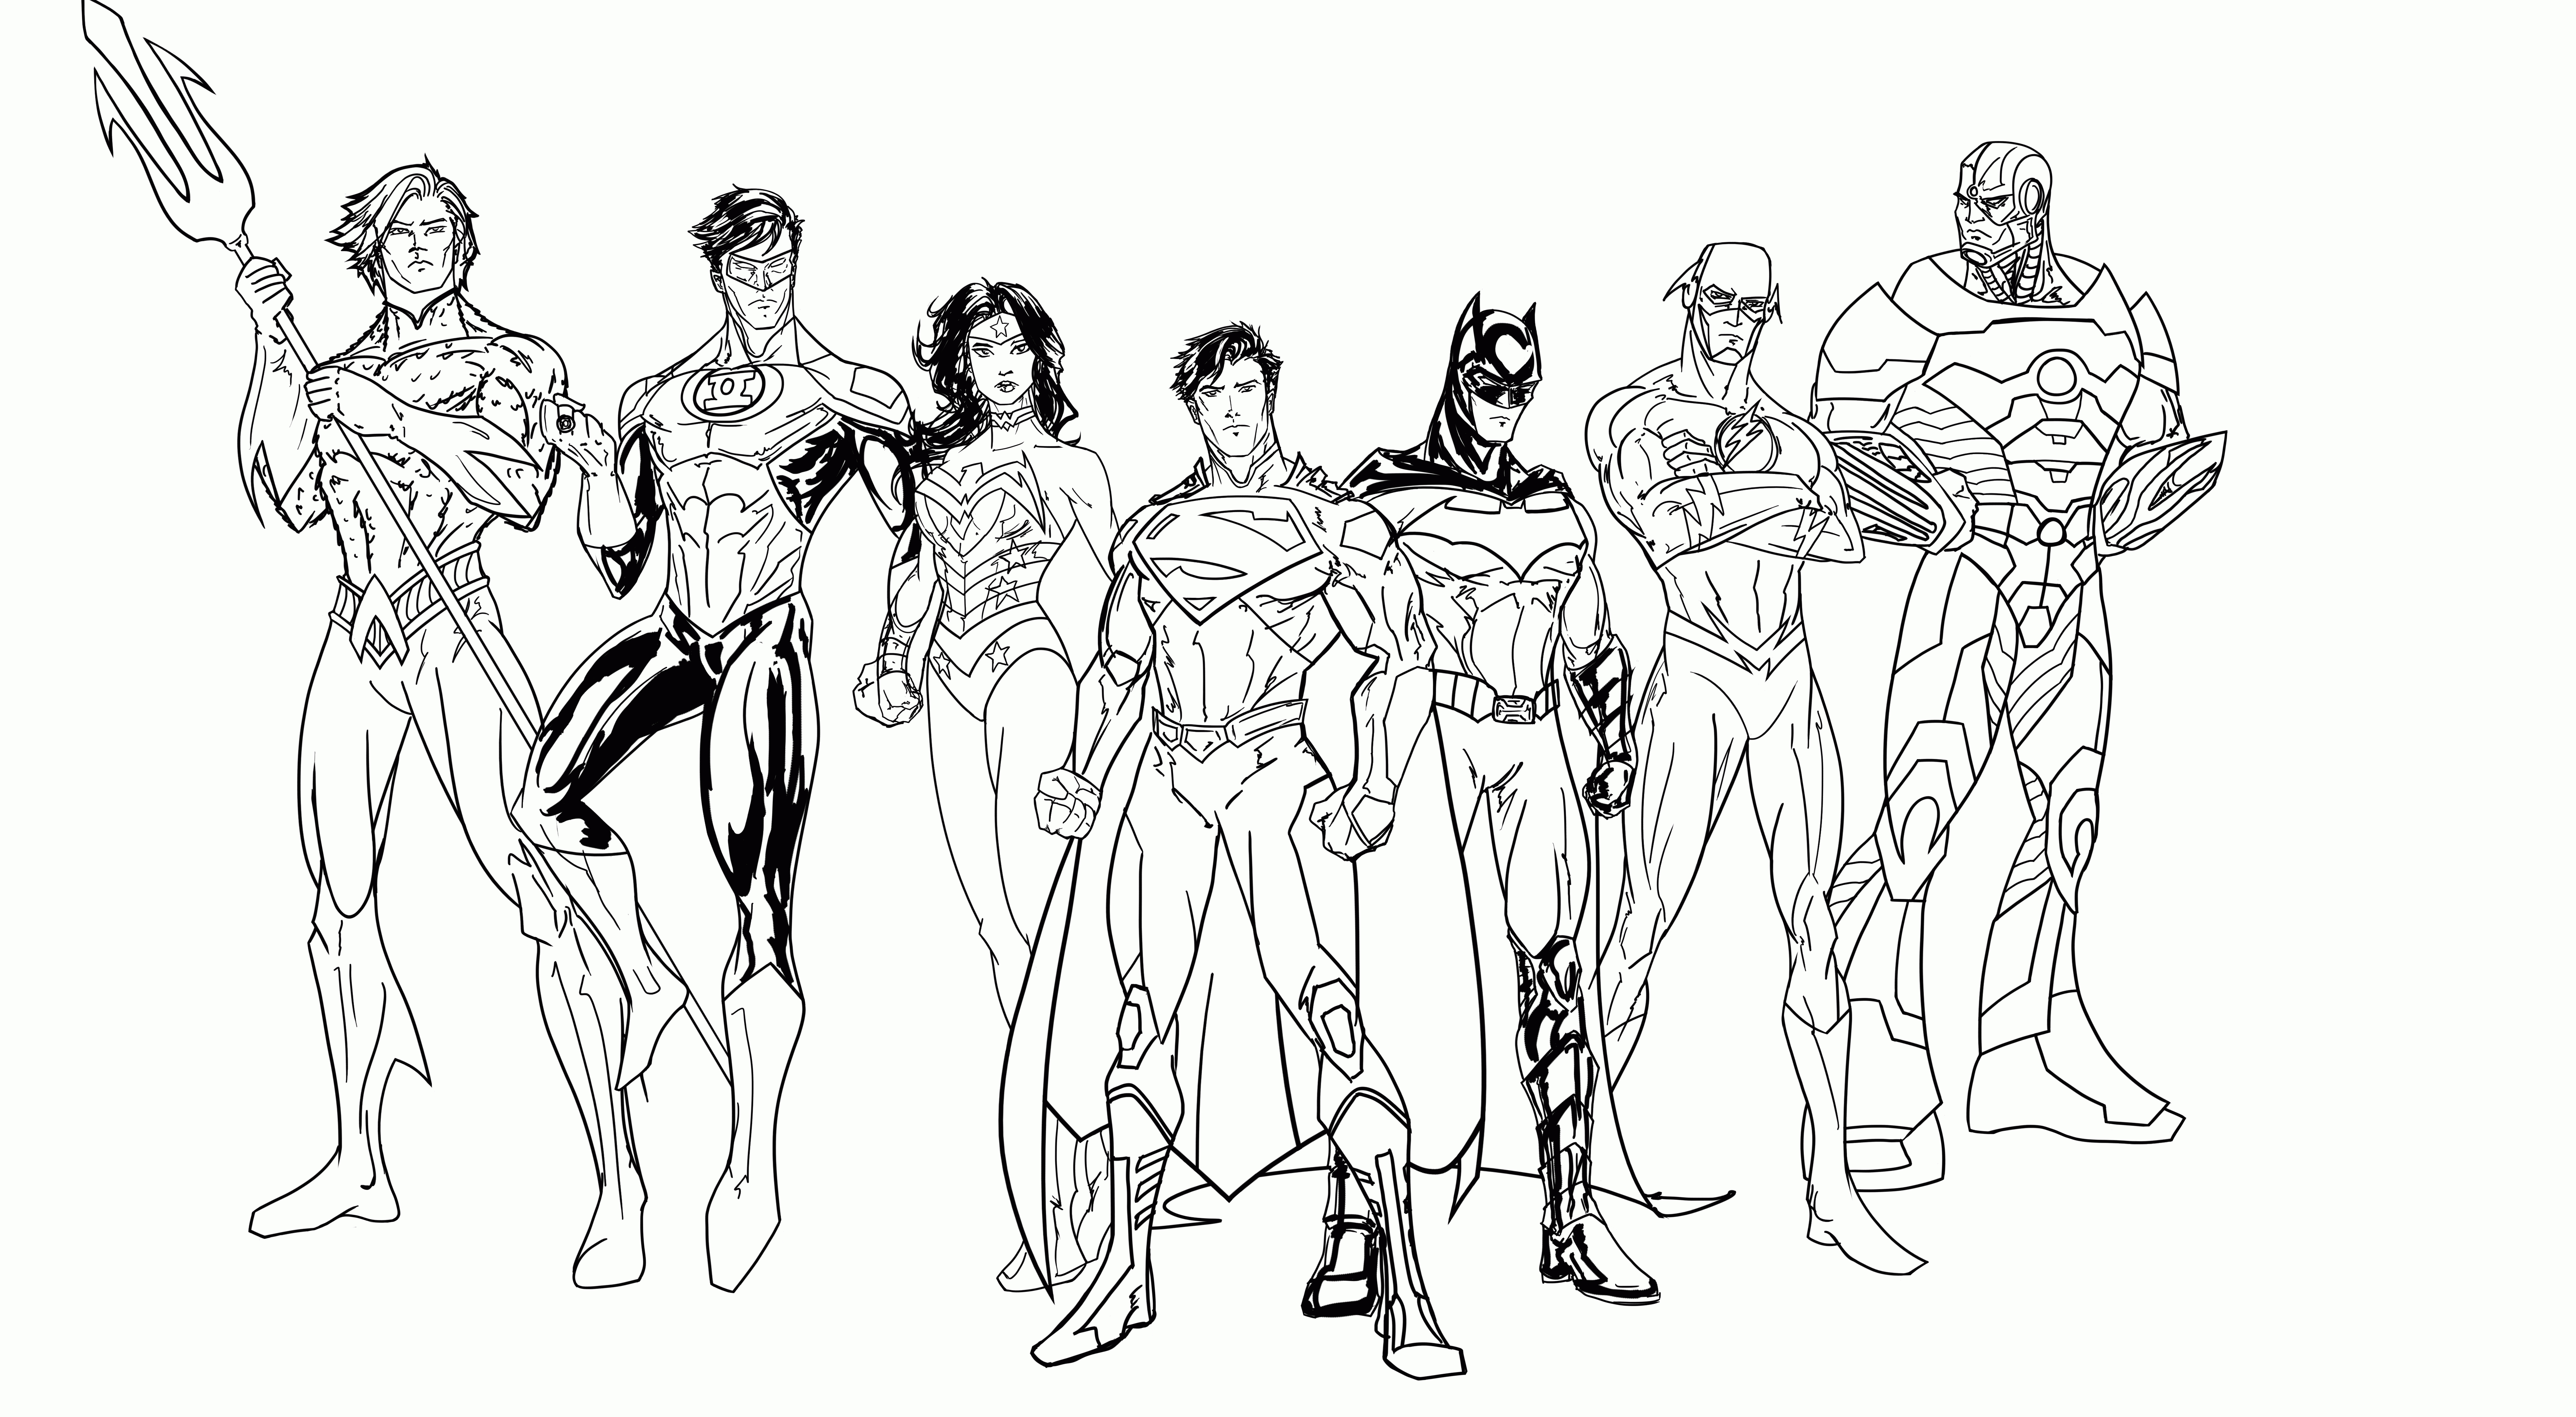 Superhero Coloring Pages Pdf - Coloring Home - Free Printable Superhero Coloring Pages Pdf